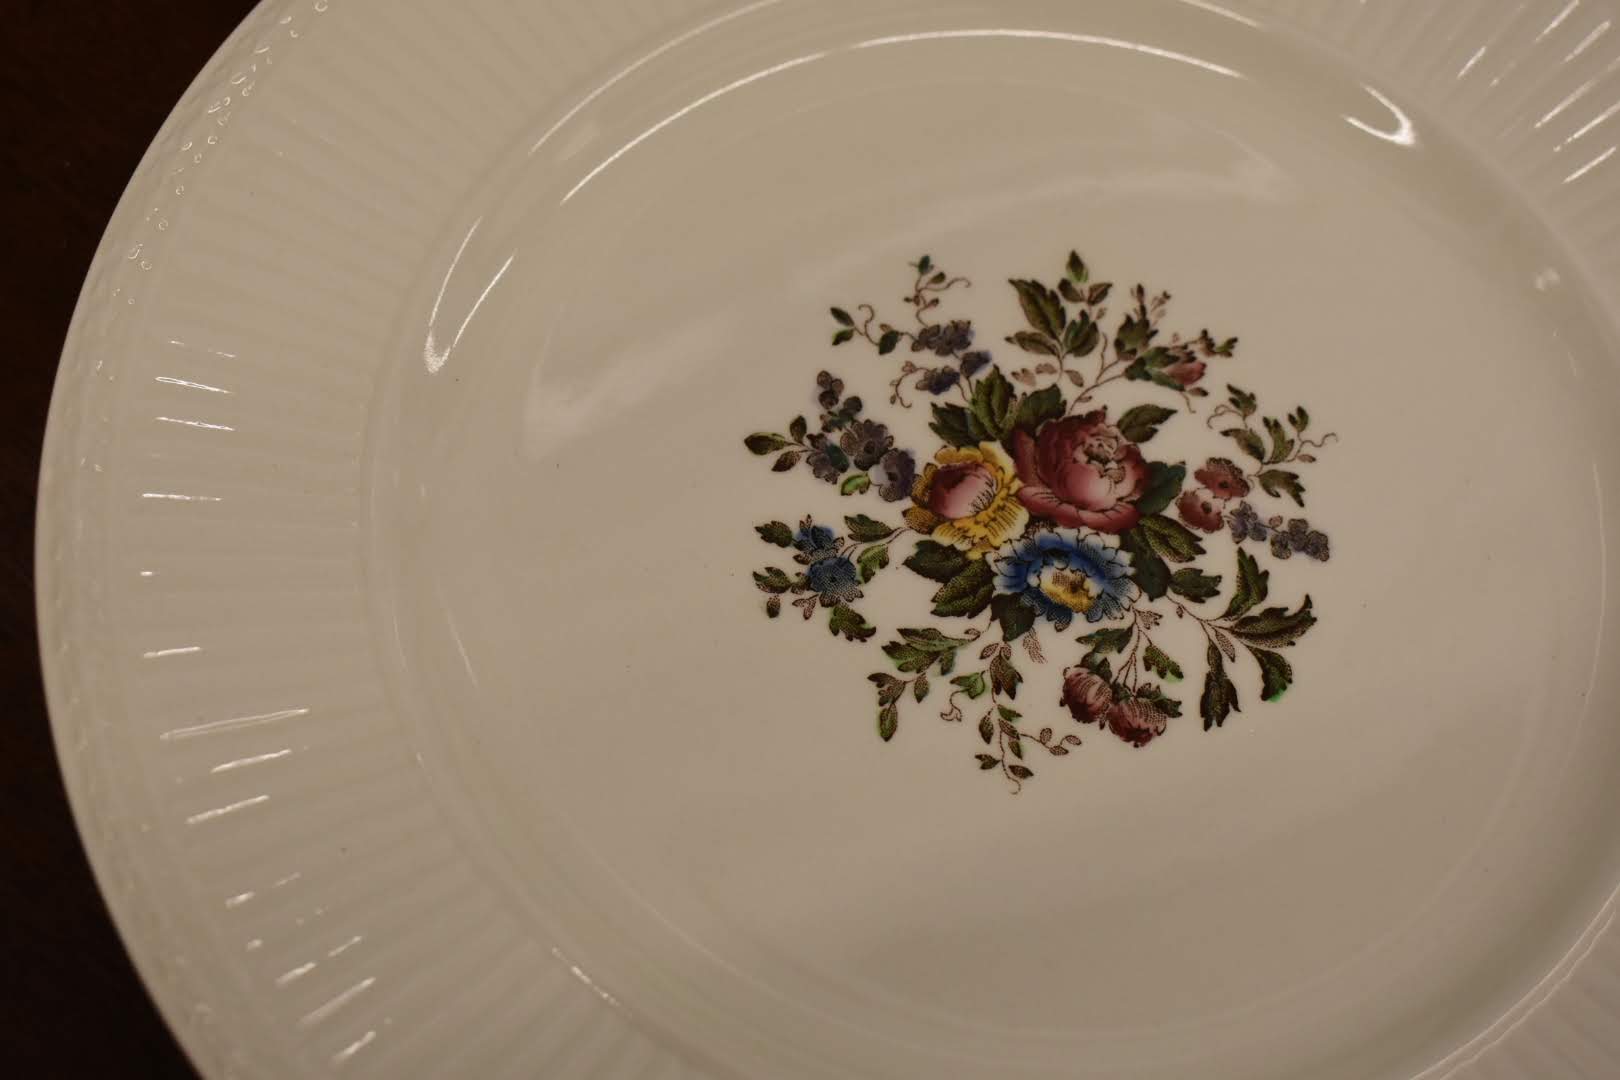 Wedgewood - Fine Porcelain China - From England - Small Round Appetizer Platter